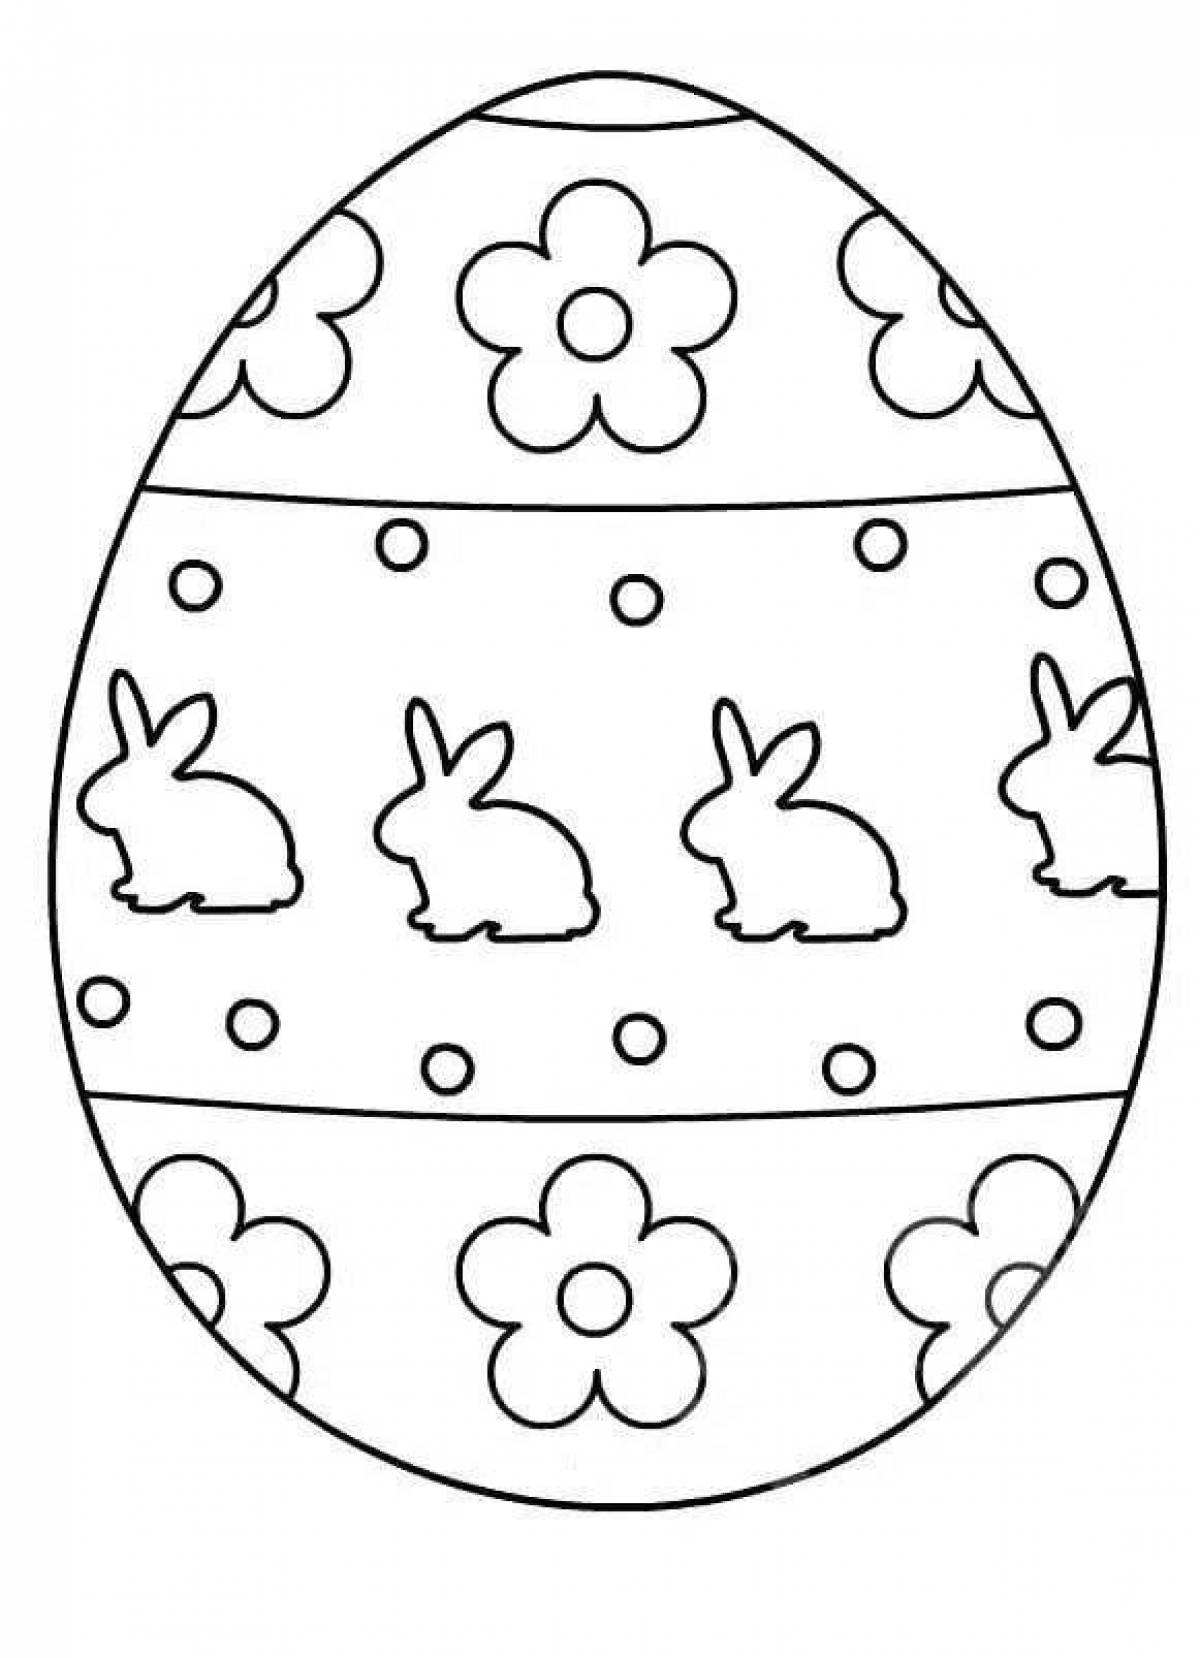 Colouring funny easter egg